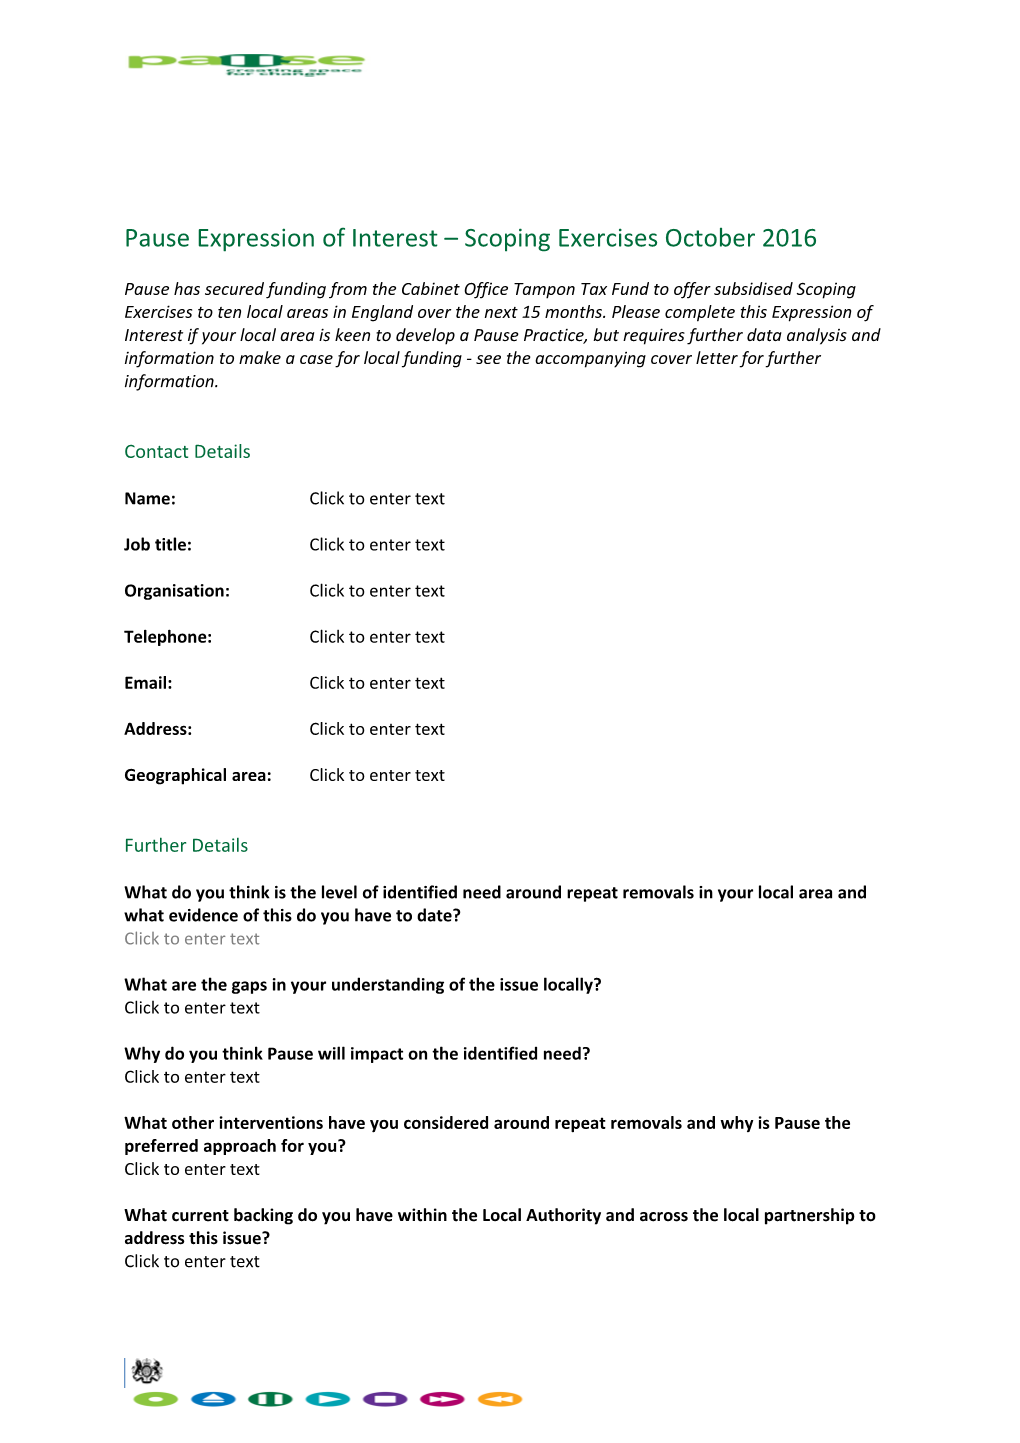 Pause Expression of Interest Scoping Exercises October 2016